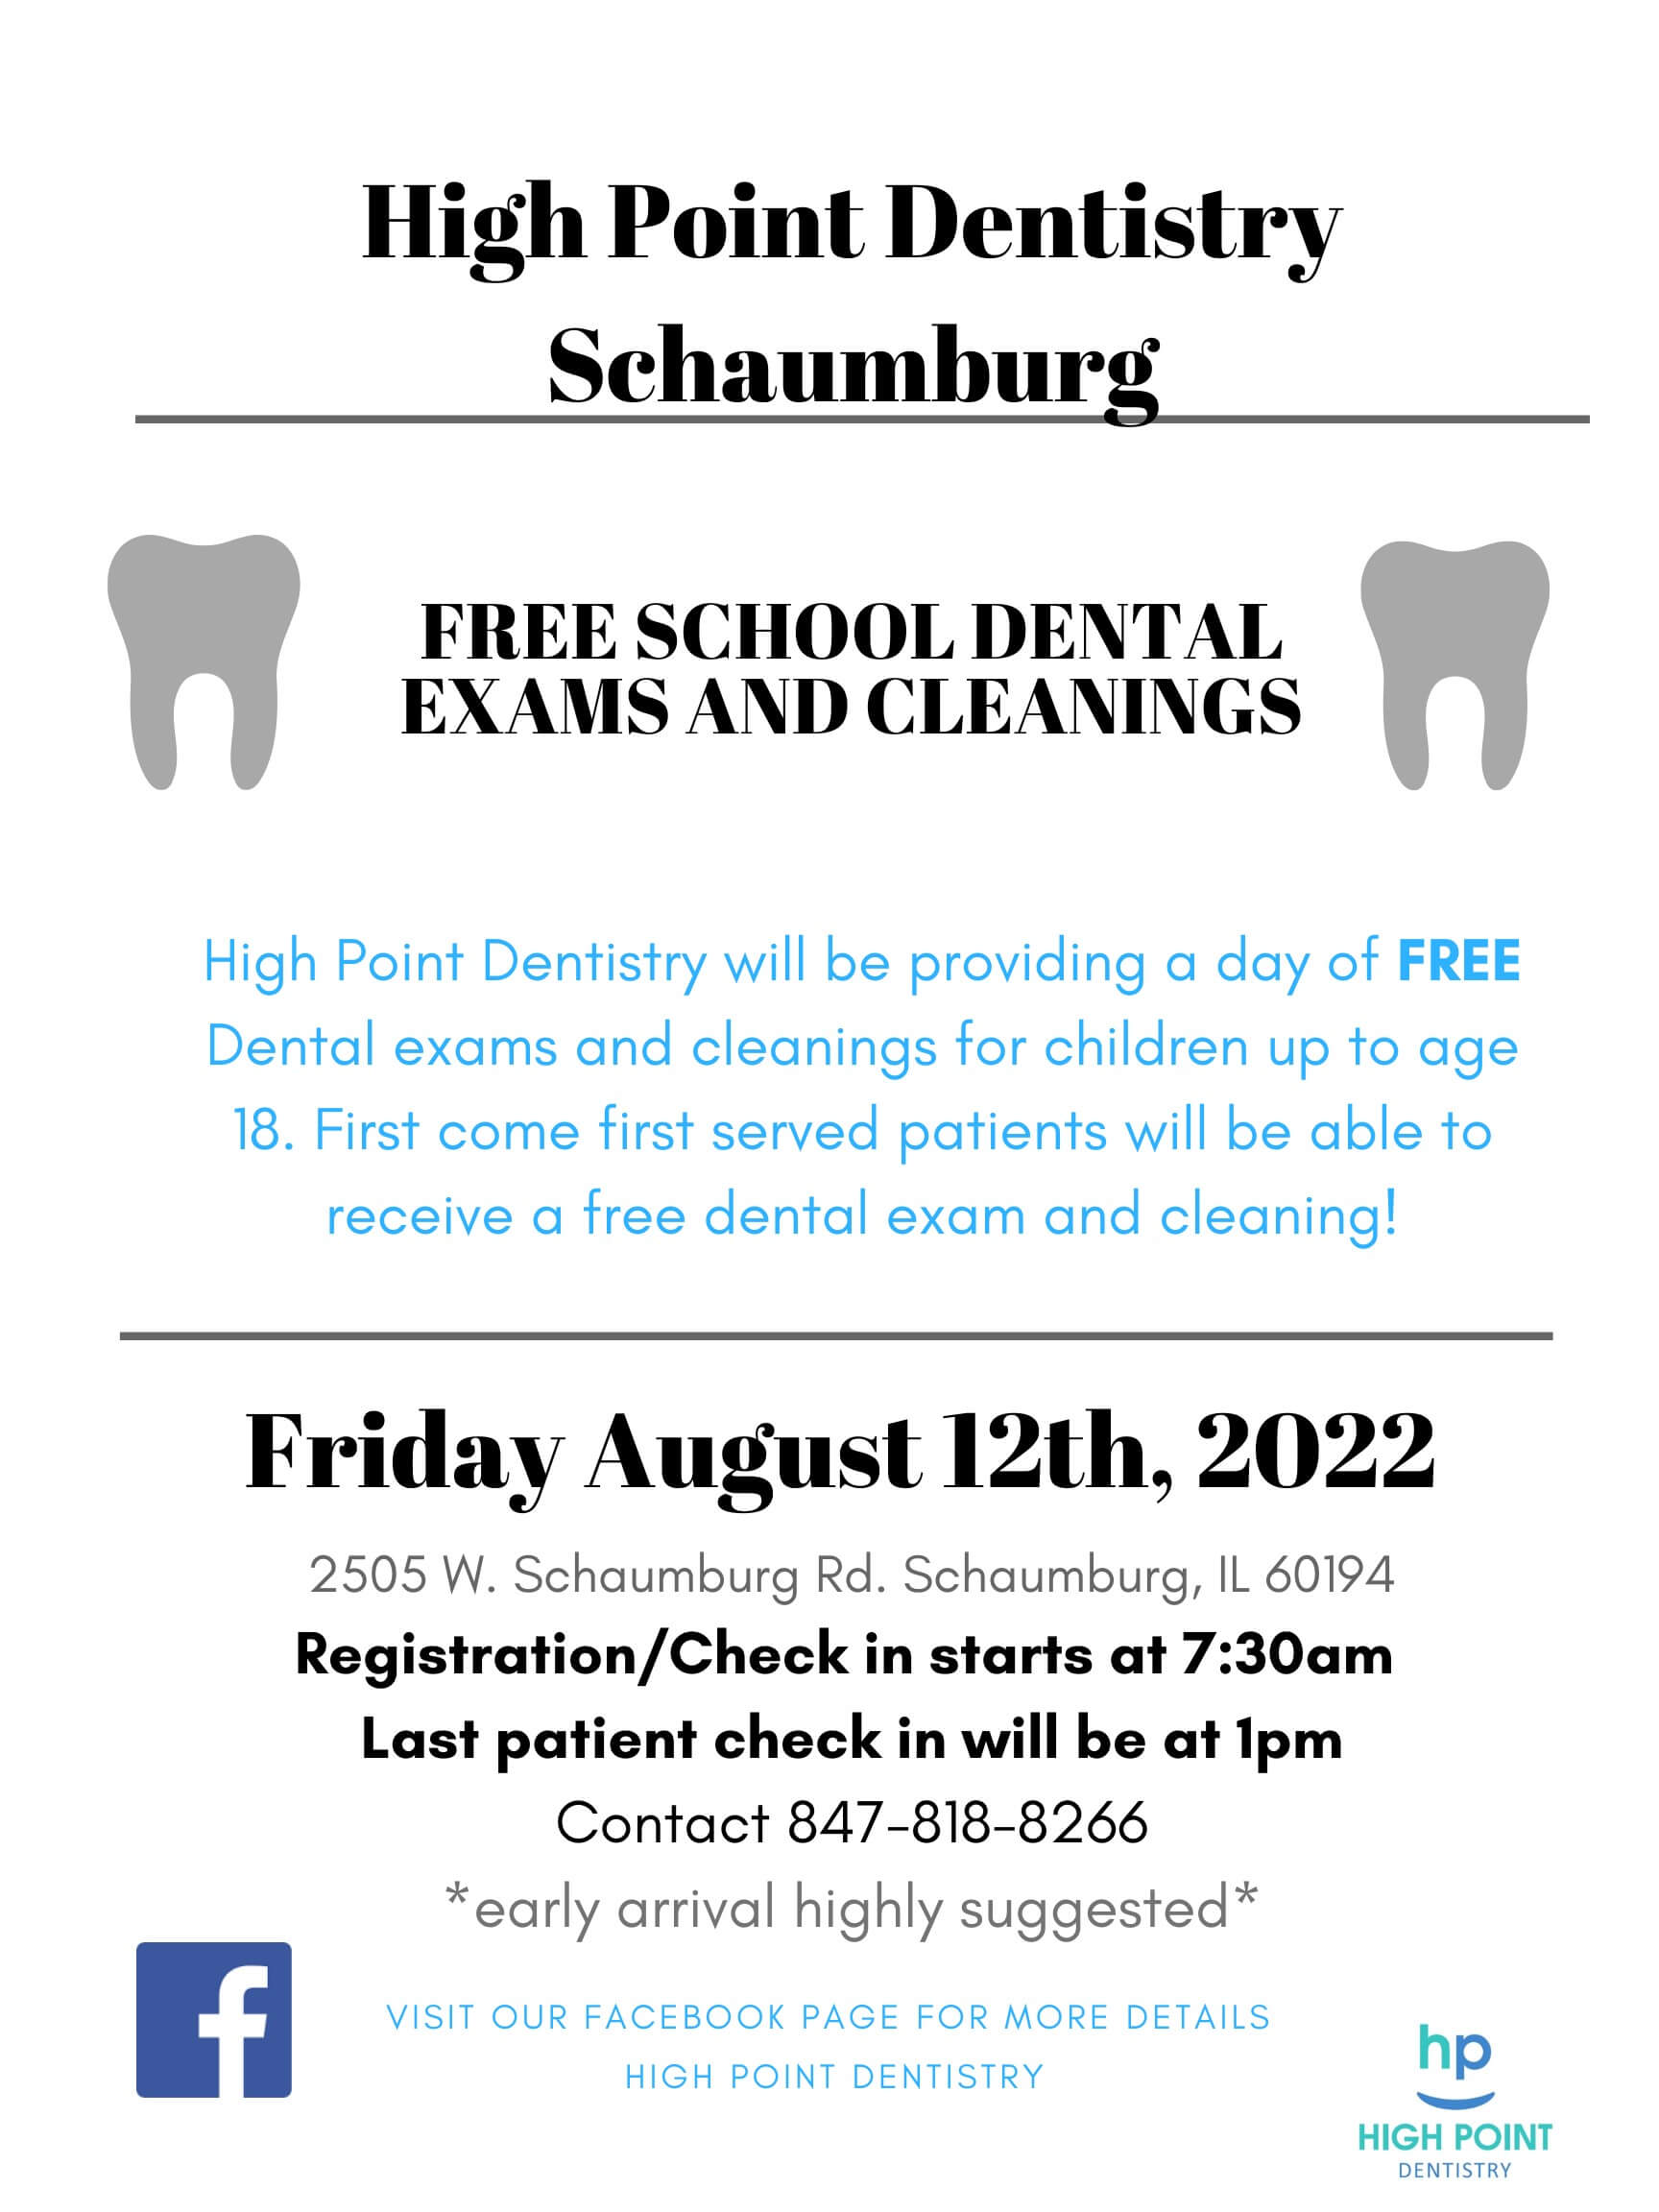 Free School Dental Exams and Cleanings - Friday, August 12th, 2022